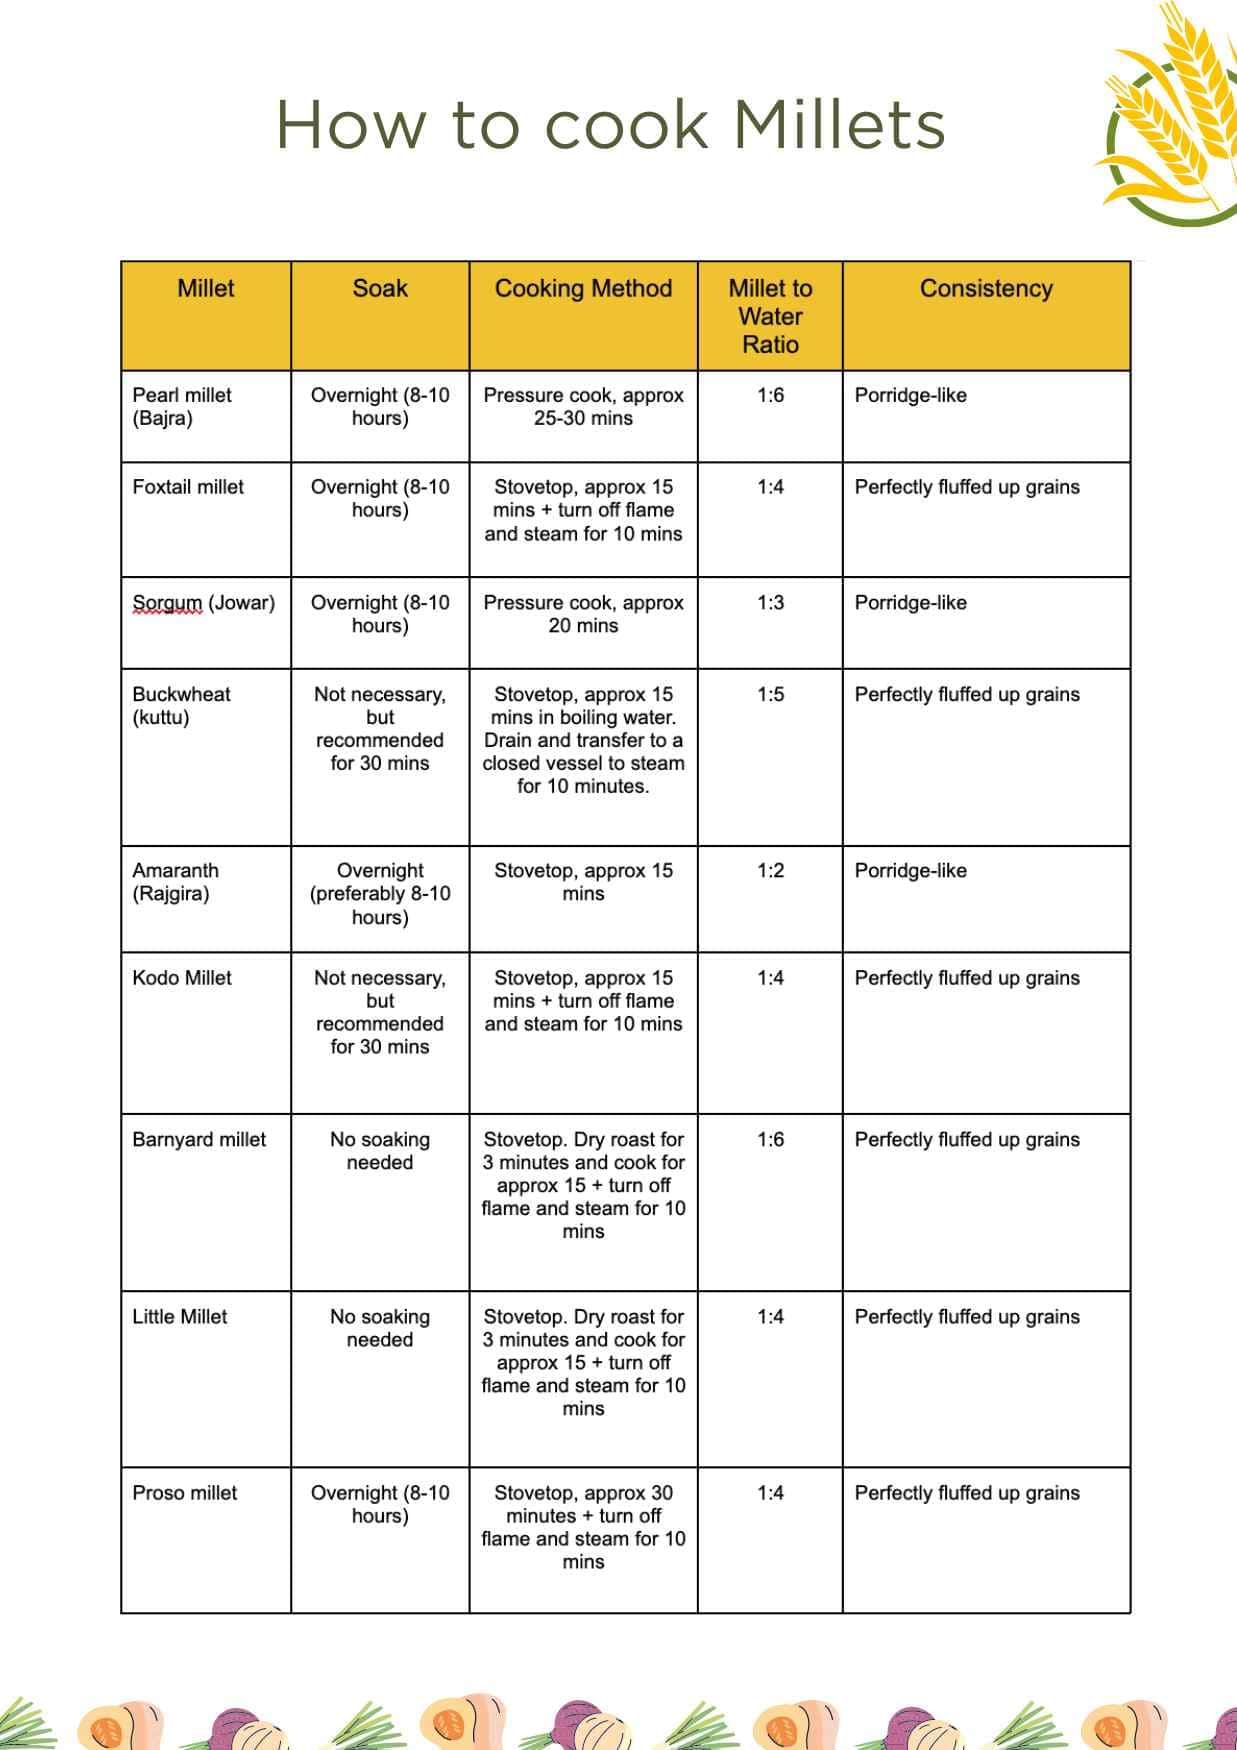 A table detailing how to cook different types of millets